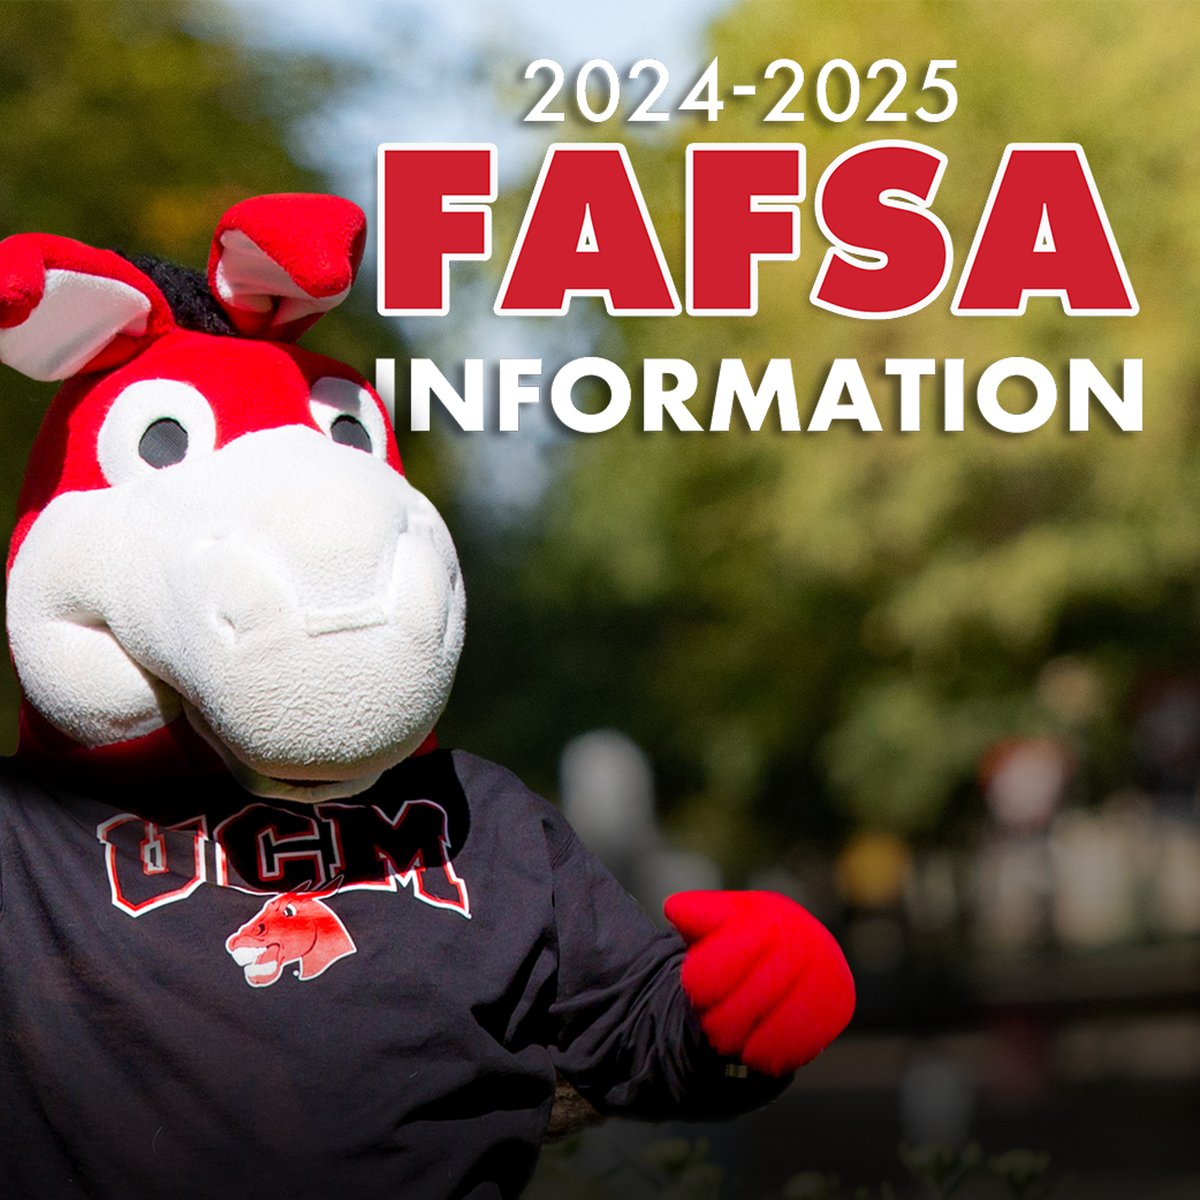 The 2024-2025 Free Application for Federal Student Aid (FAFSA) is OPEN! Go to fafsa.gov to apply. The priority deadline is April 1. Use UCM’s FAFSA code – 002454! If you have questions, please contact one of our admissions counselors at 660-543-4290, option 3.